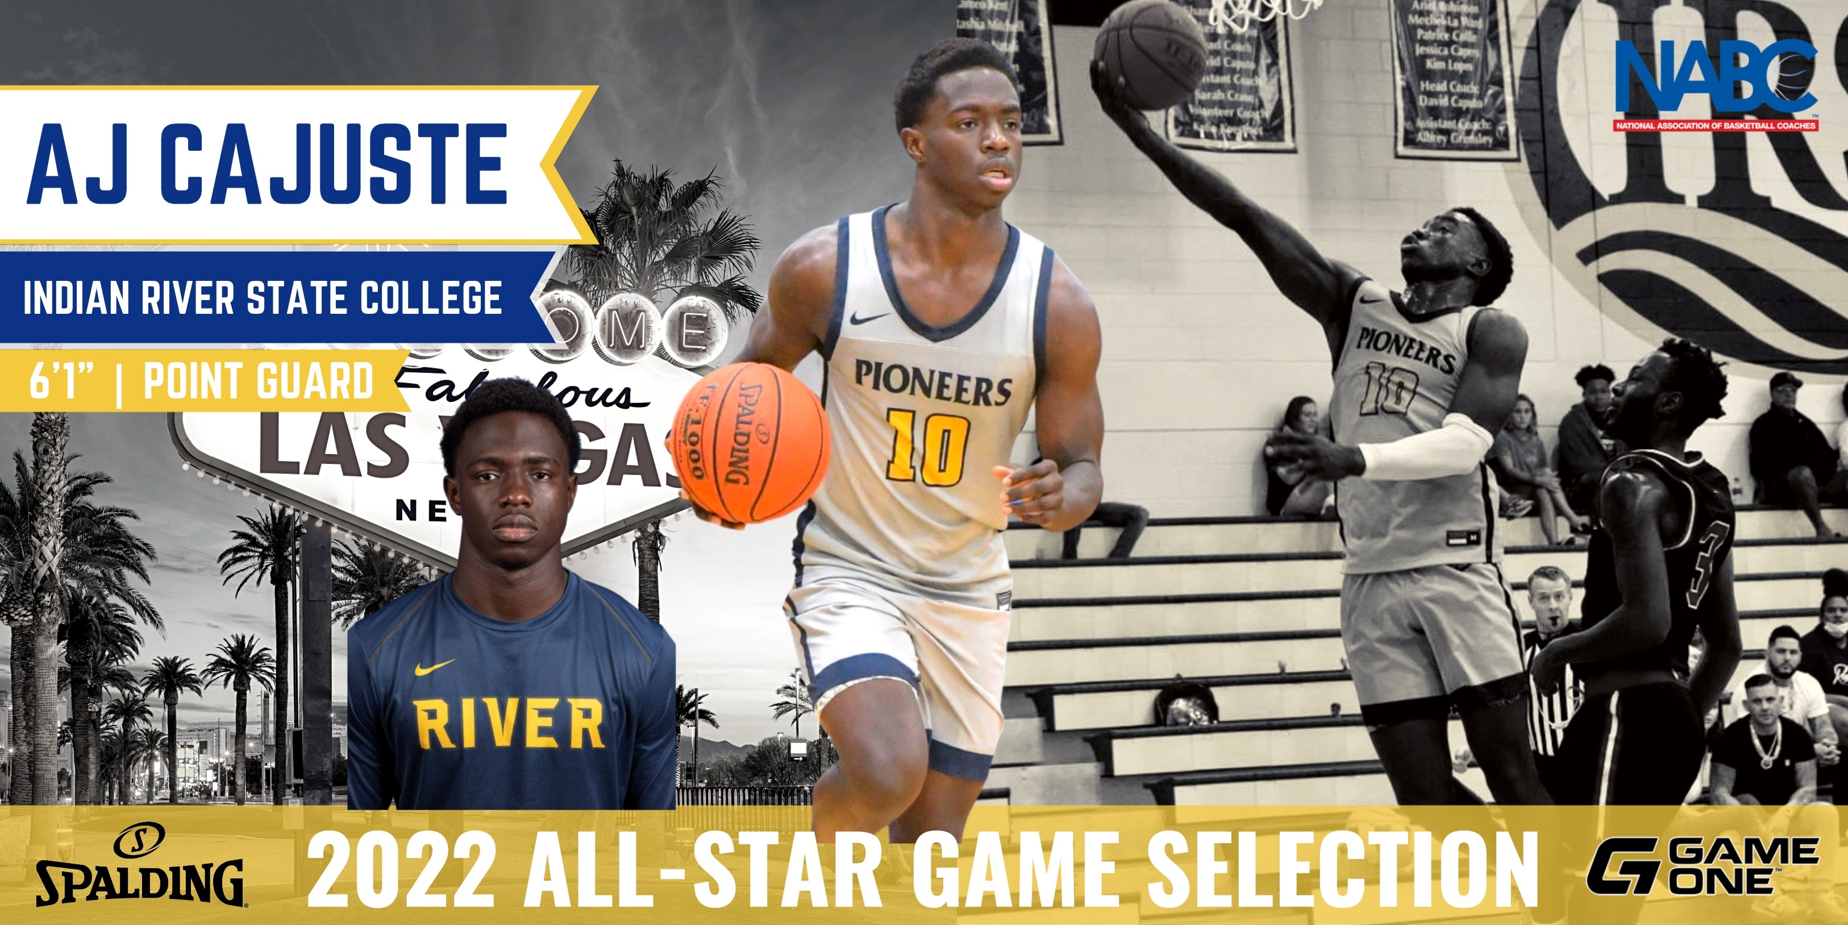 A. J. Cajuste Selected To The NJCAA Men’s Basketball Coaches Association All Star Game